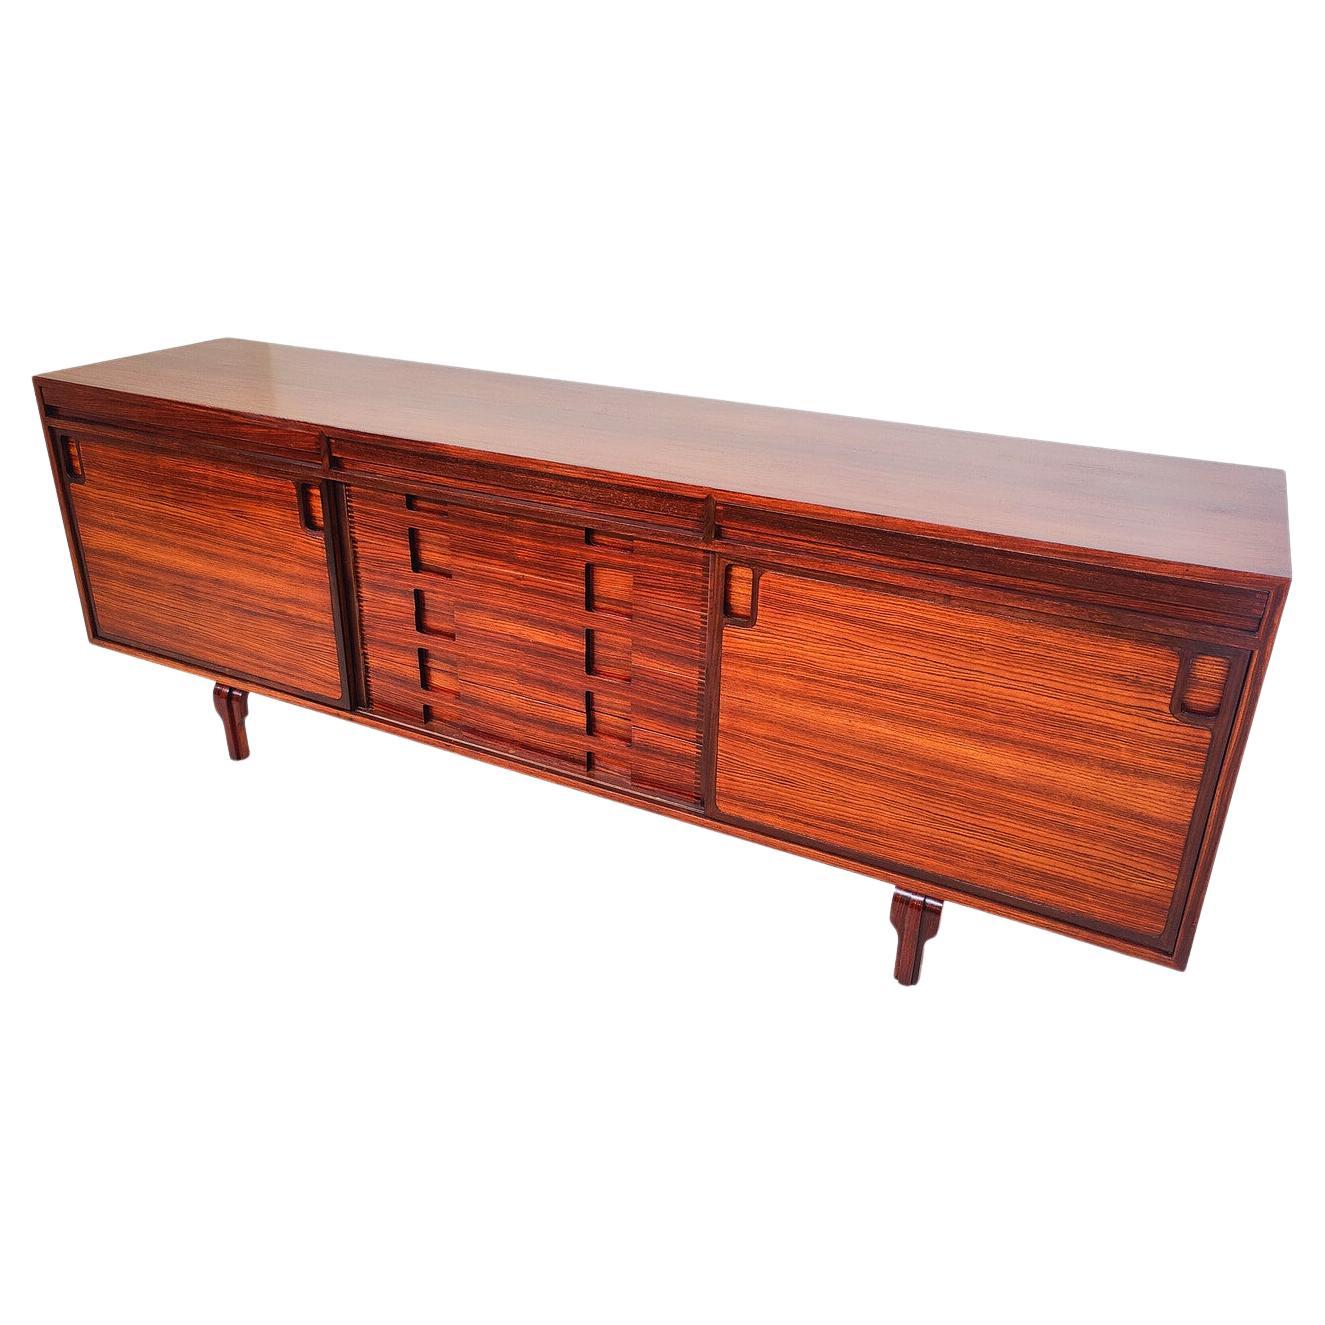 Mid-Century Modern Sideboard by Renato Magri for Cantieri Carugati, Italy, 1960s